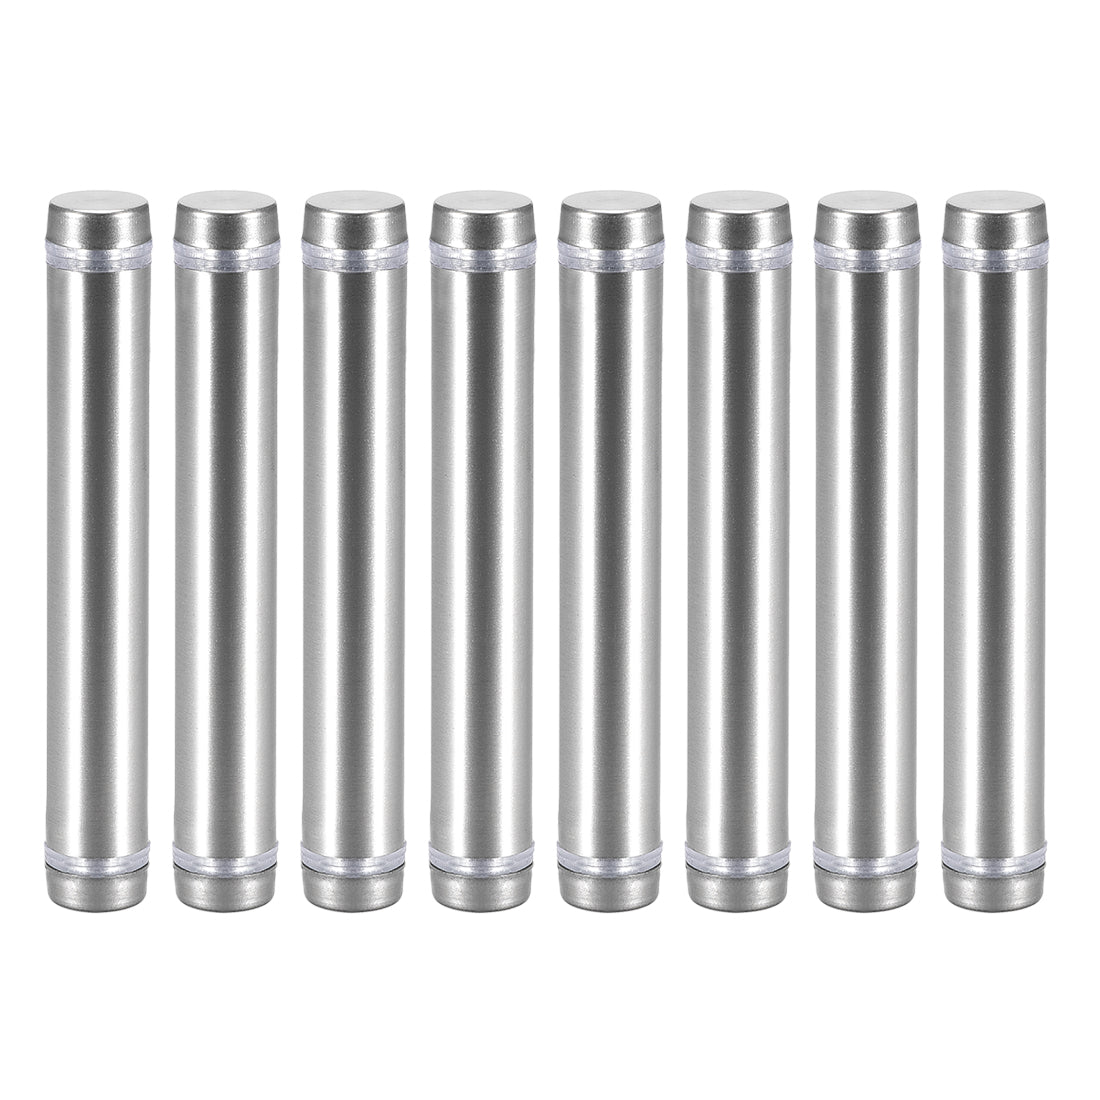 uxcell Uxcell Glass Standoff Double Head Stainless Steel Standoff Holder 12mm x 84mm 8 Pcs